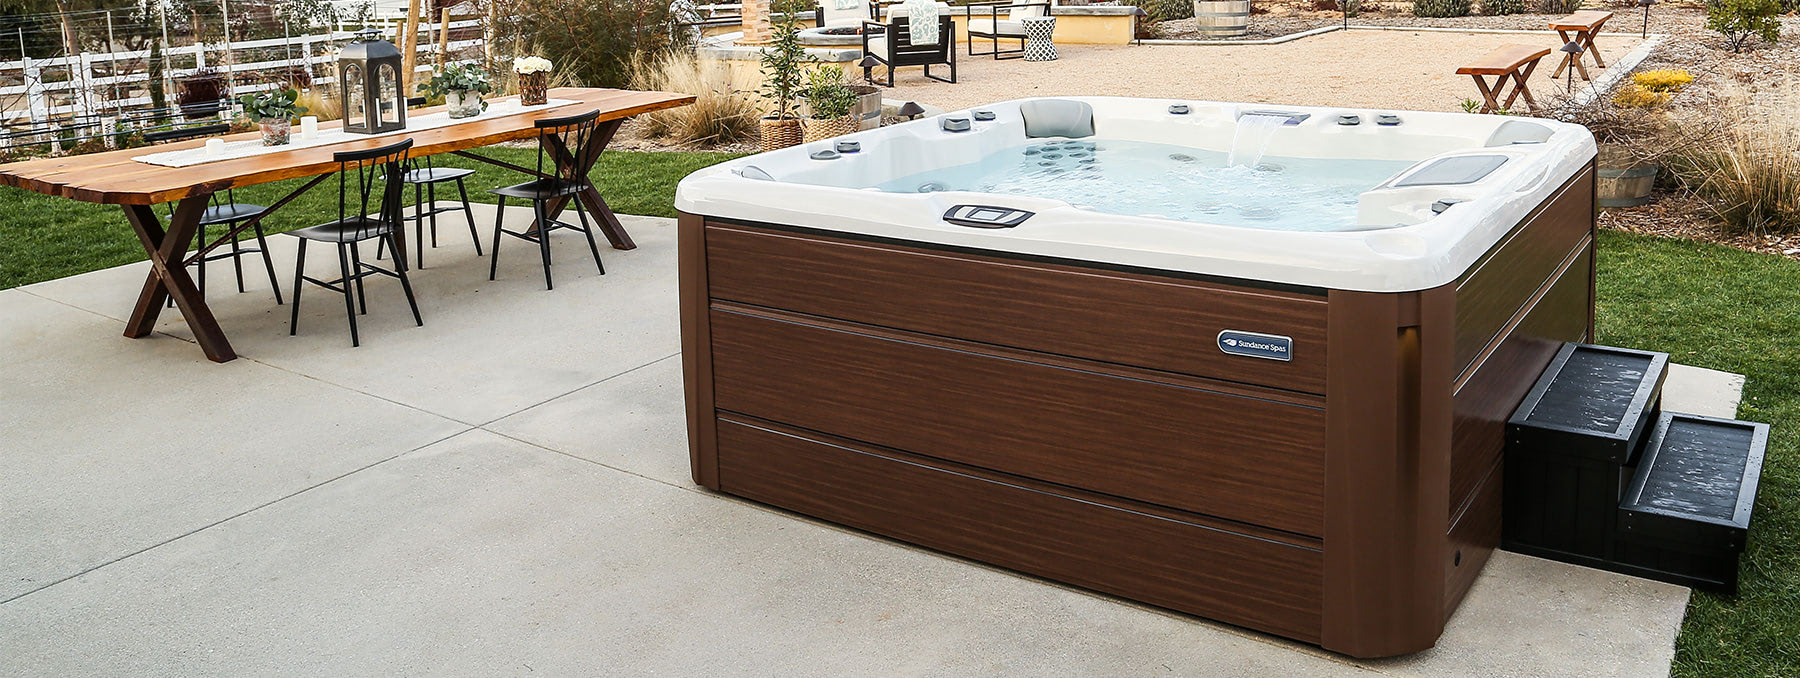 Is a Smaller Hot Tub more efficient?